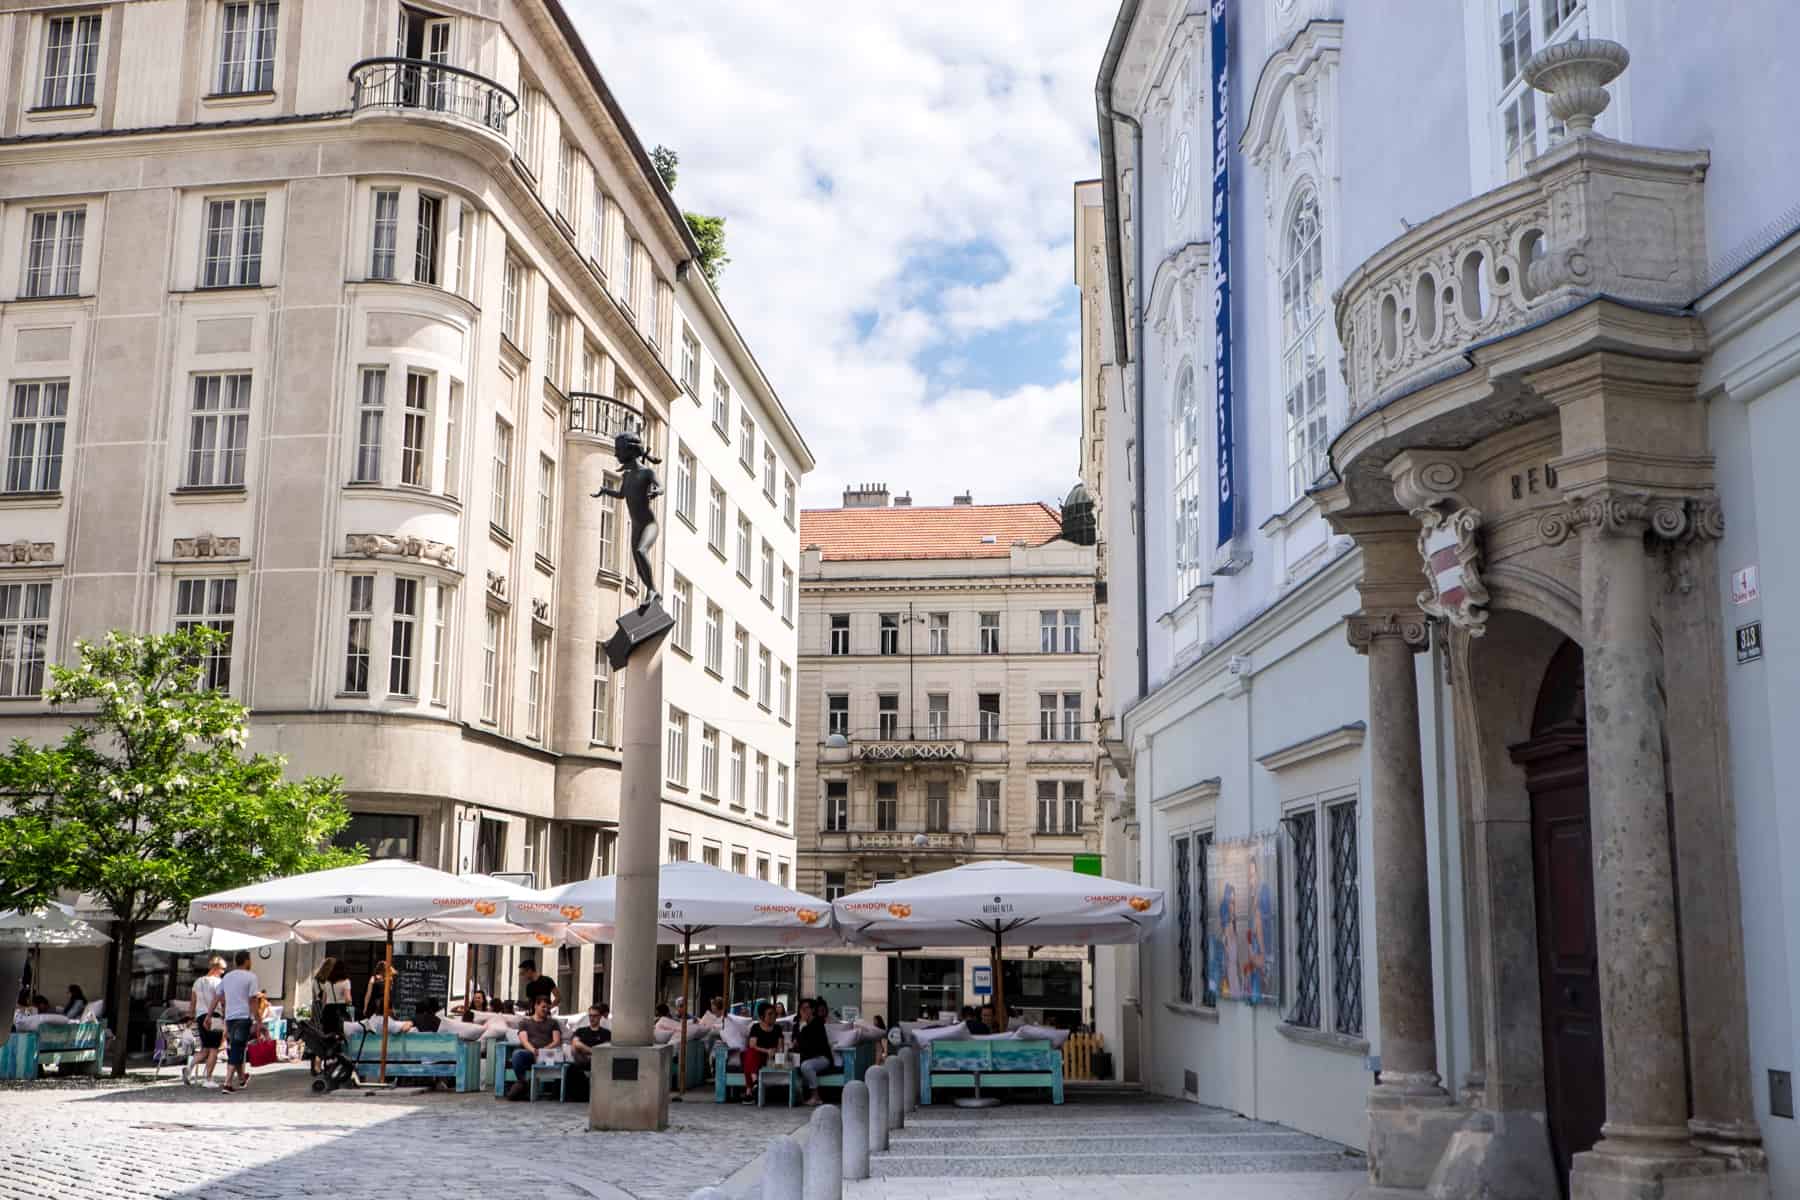 The the statue of Mozart in Brno on a tall column in front of alfreso diners, beige and blue classic style buildings. 